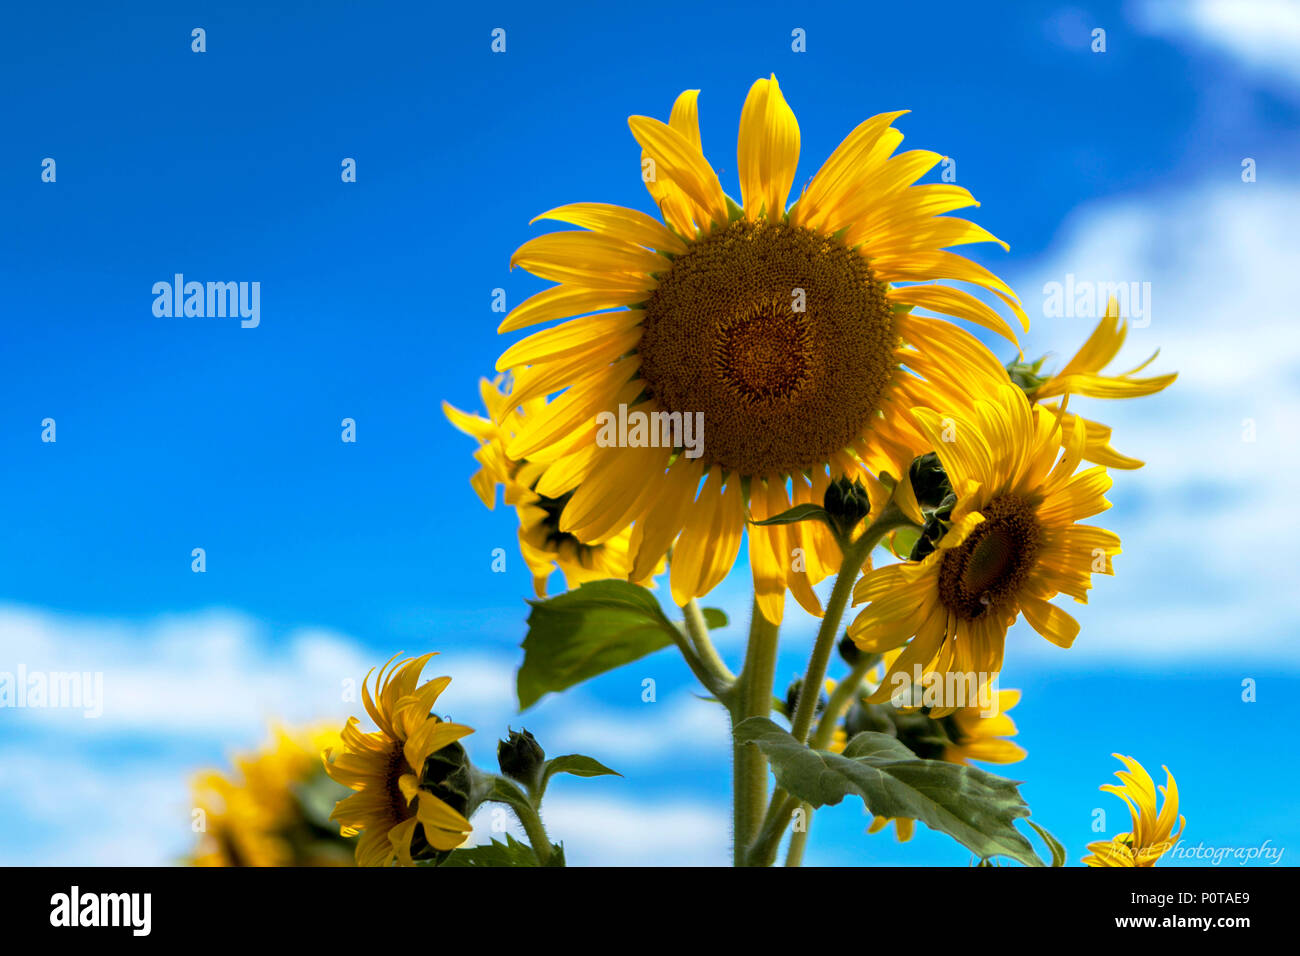 Sunflowers and Blue Sky Stock Photo